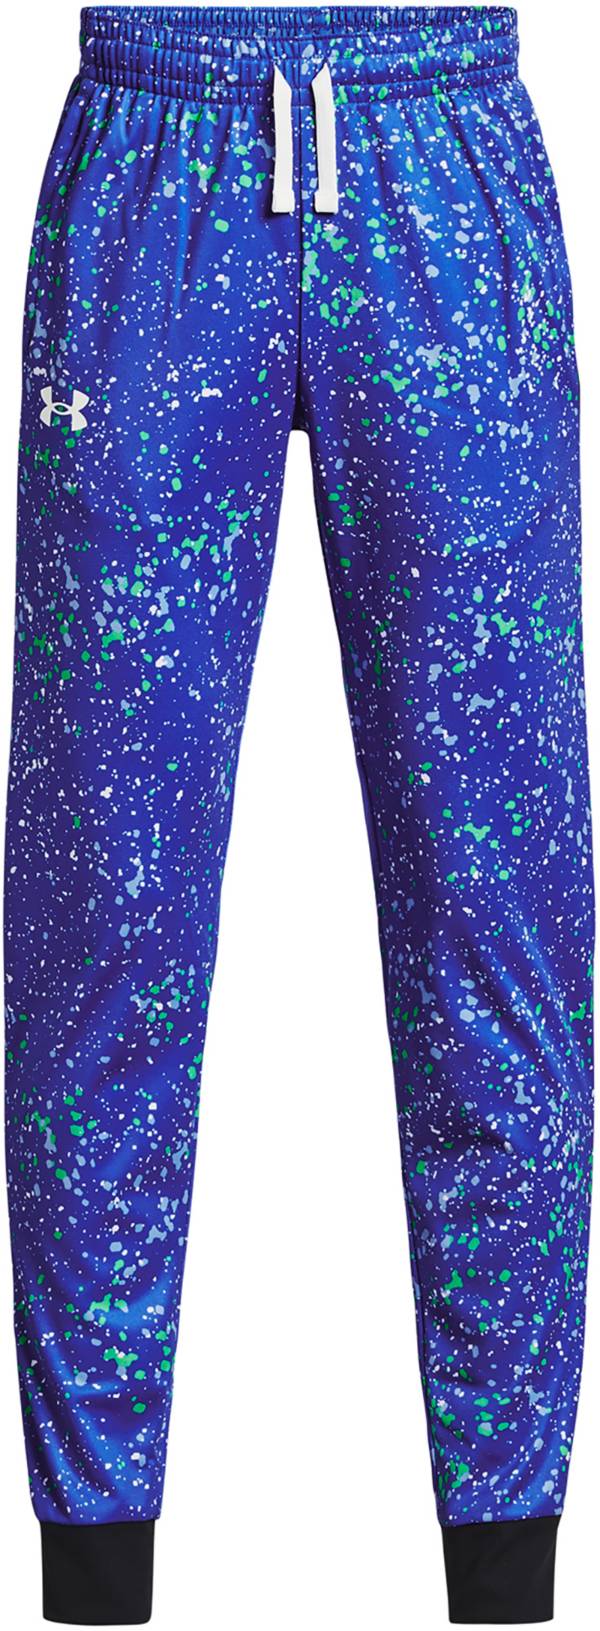 Under Armour Boys' Pennant Novelty Pants product image